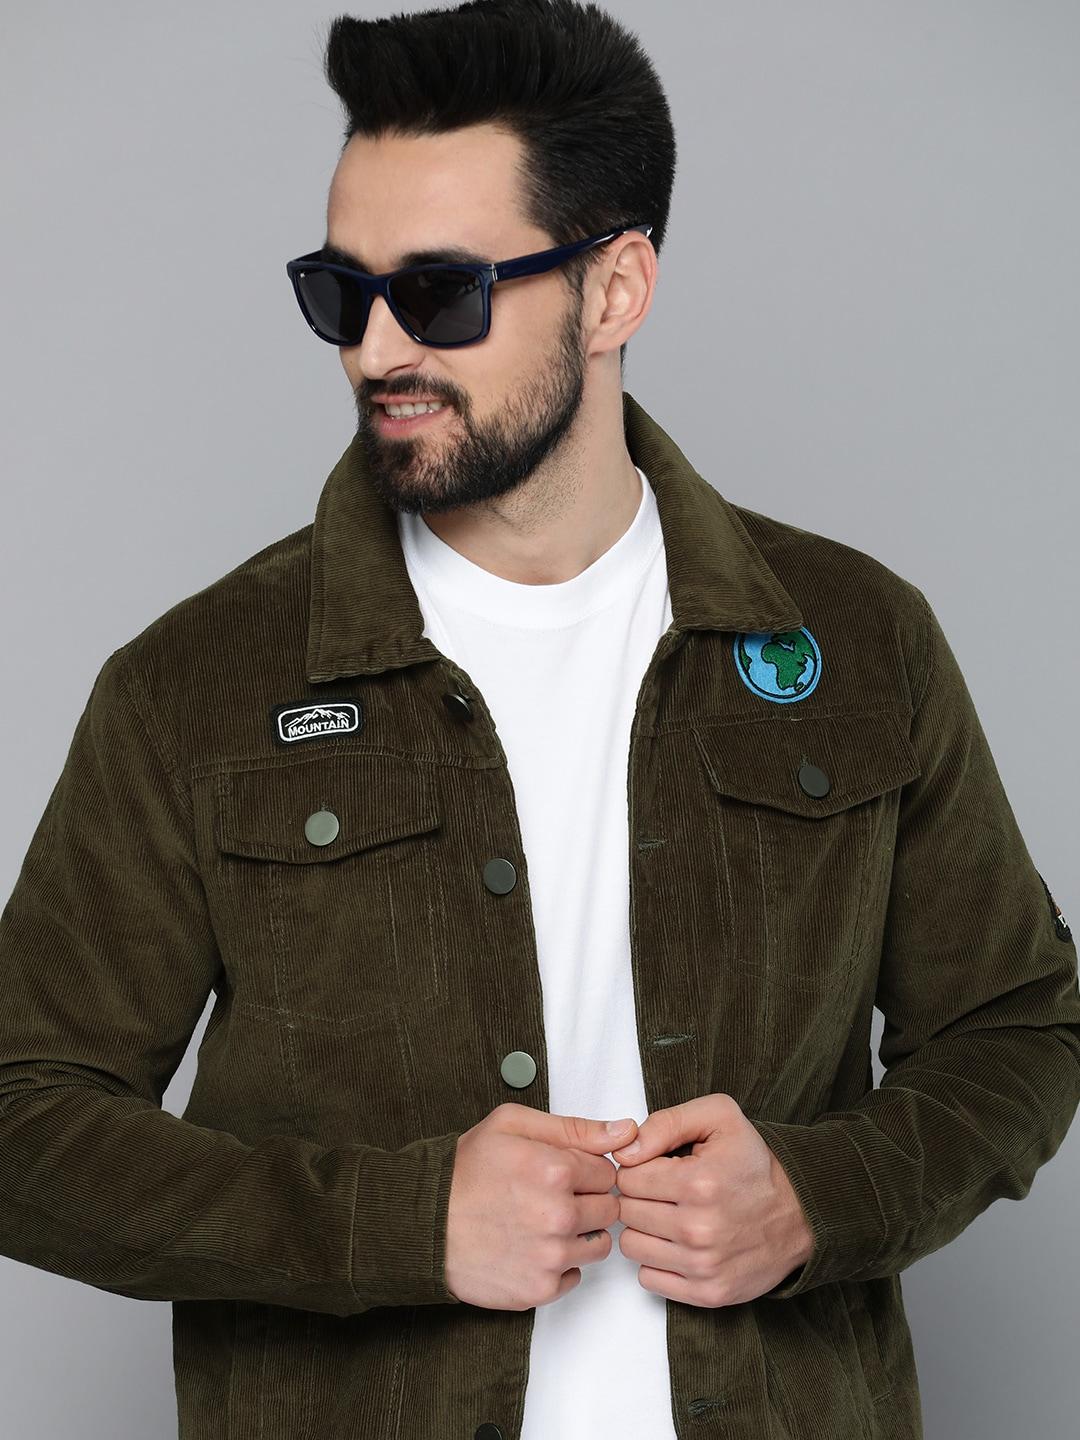 here&now men olive green graphic printed tailored jacket